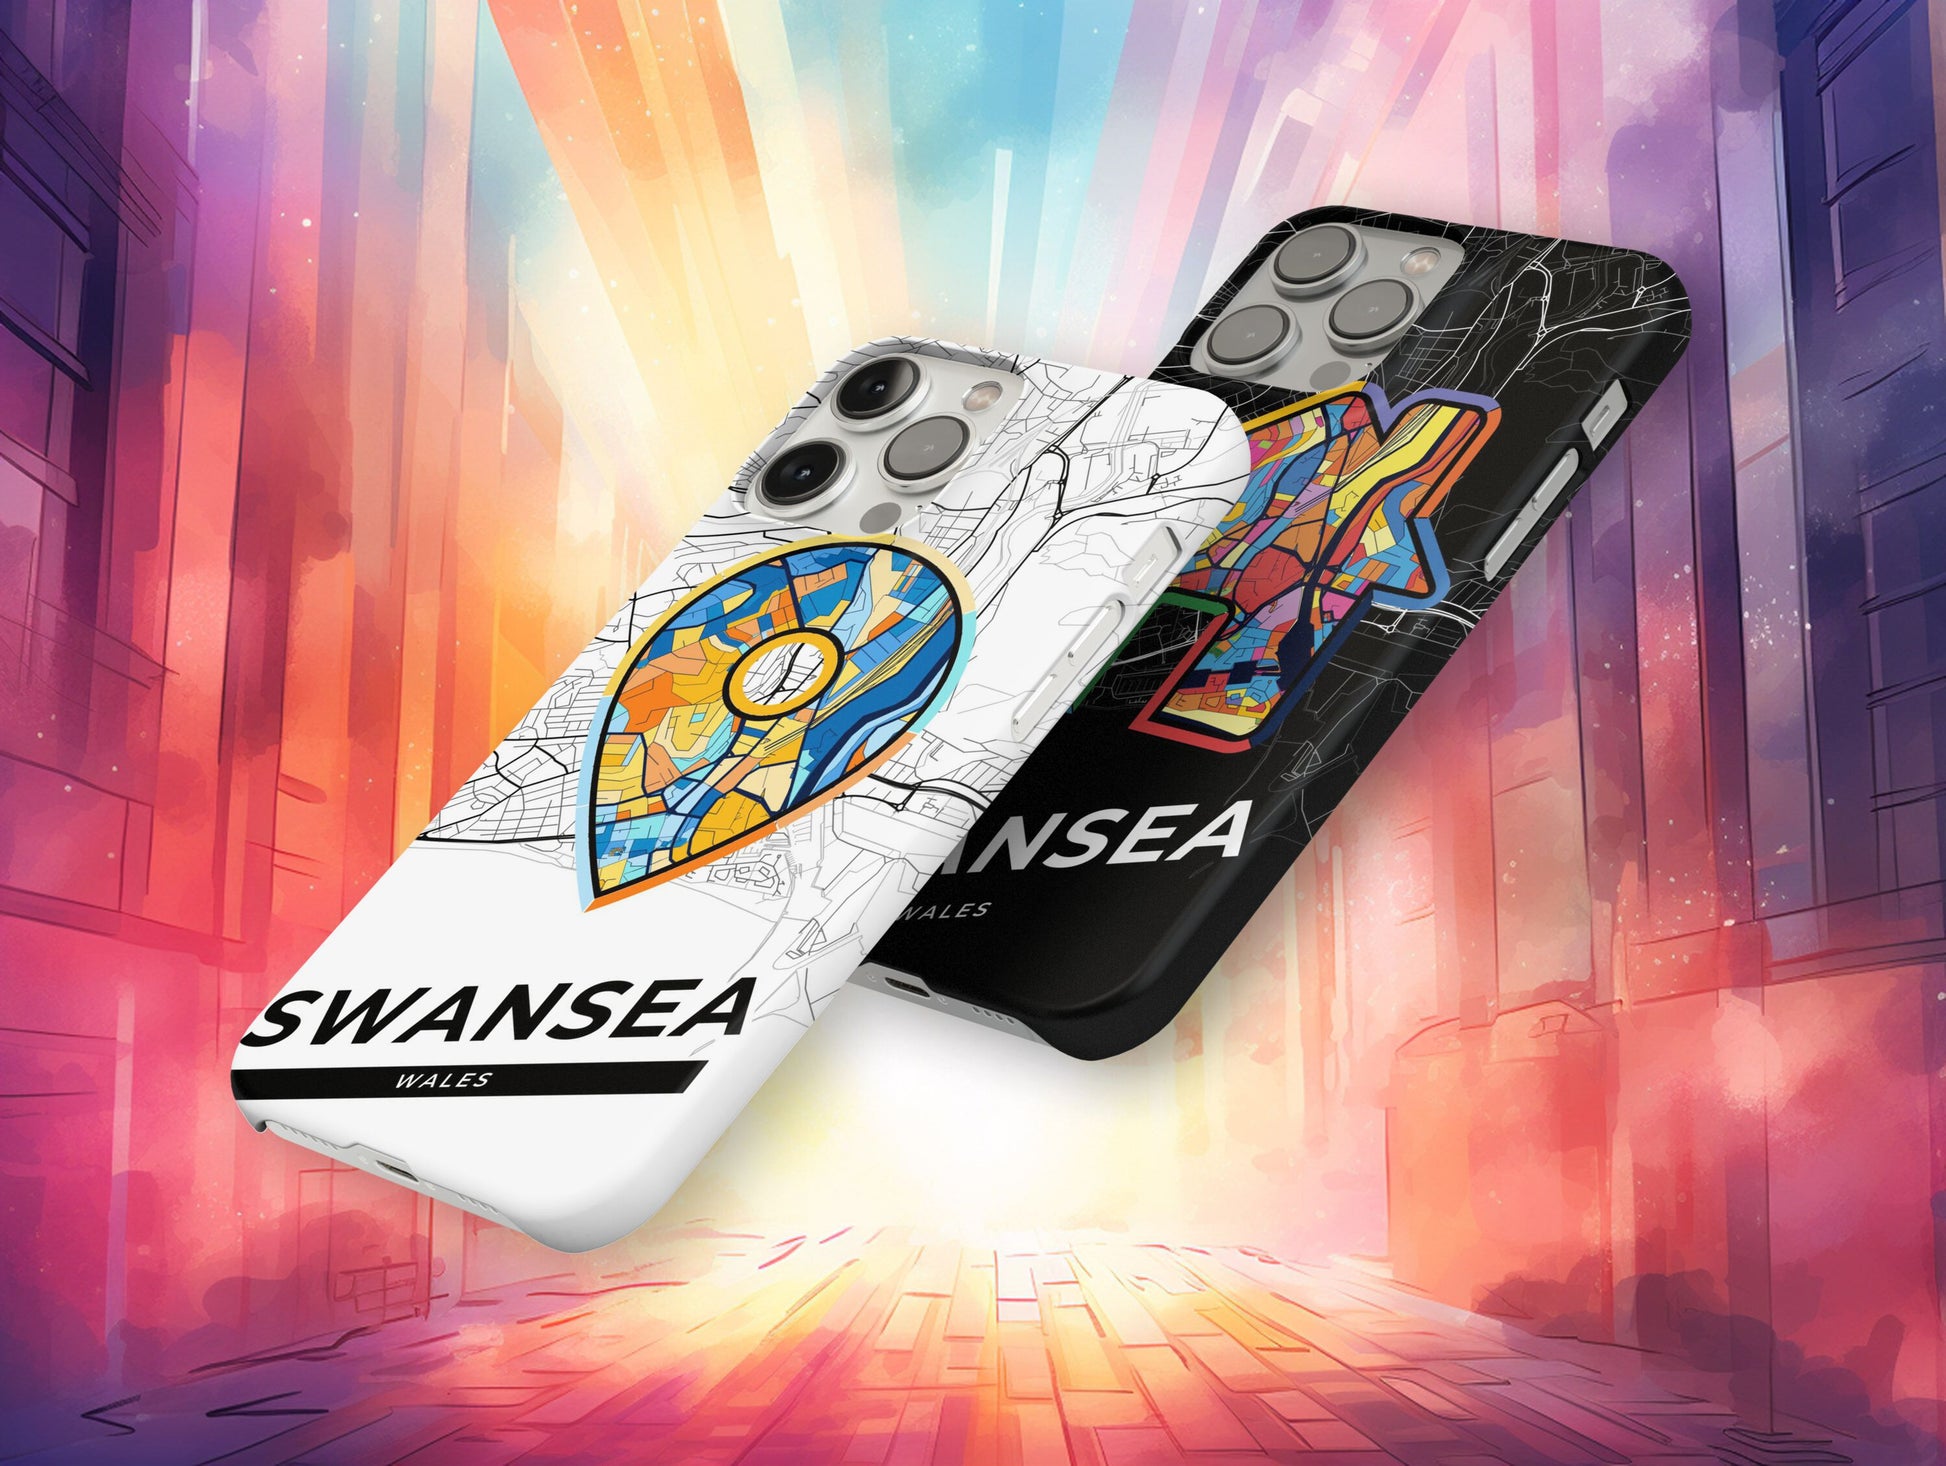 Swansea Wales slim phone case with colorful icon